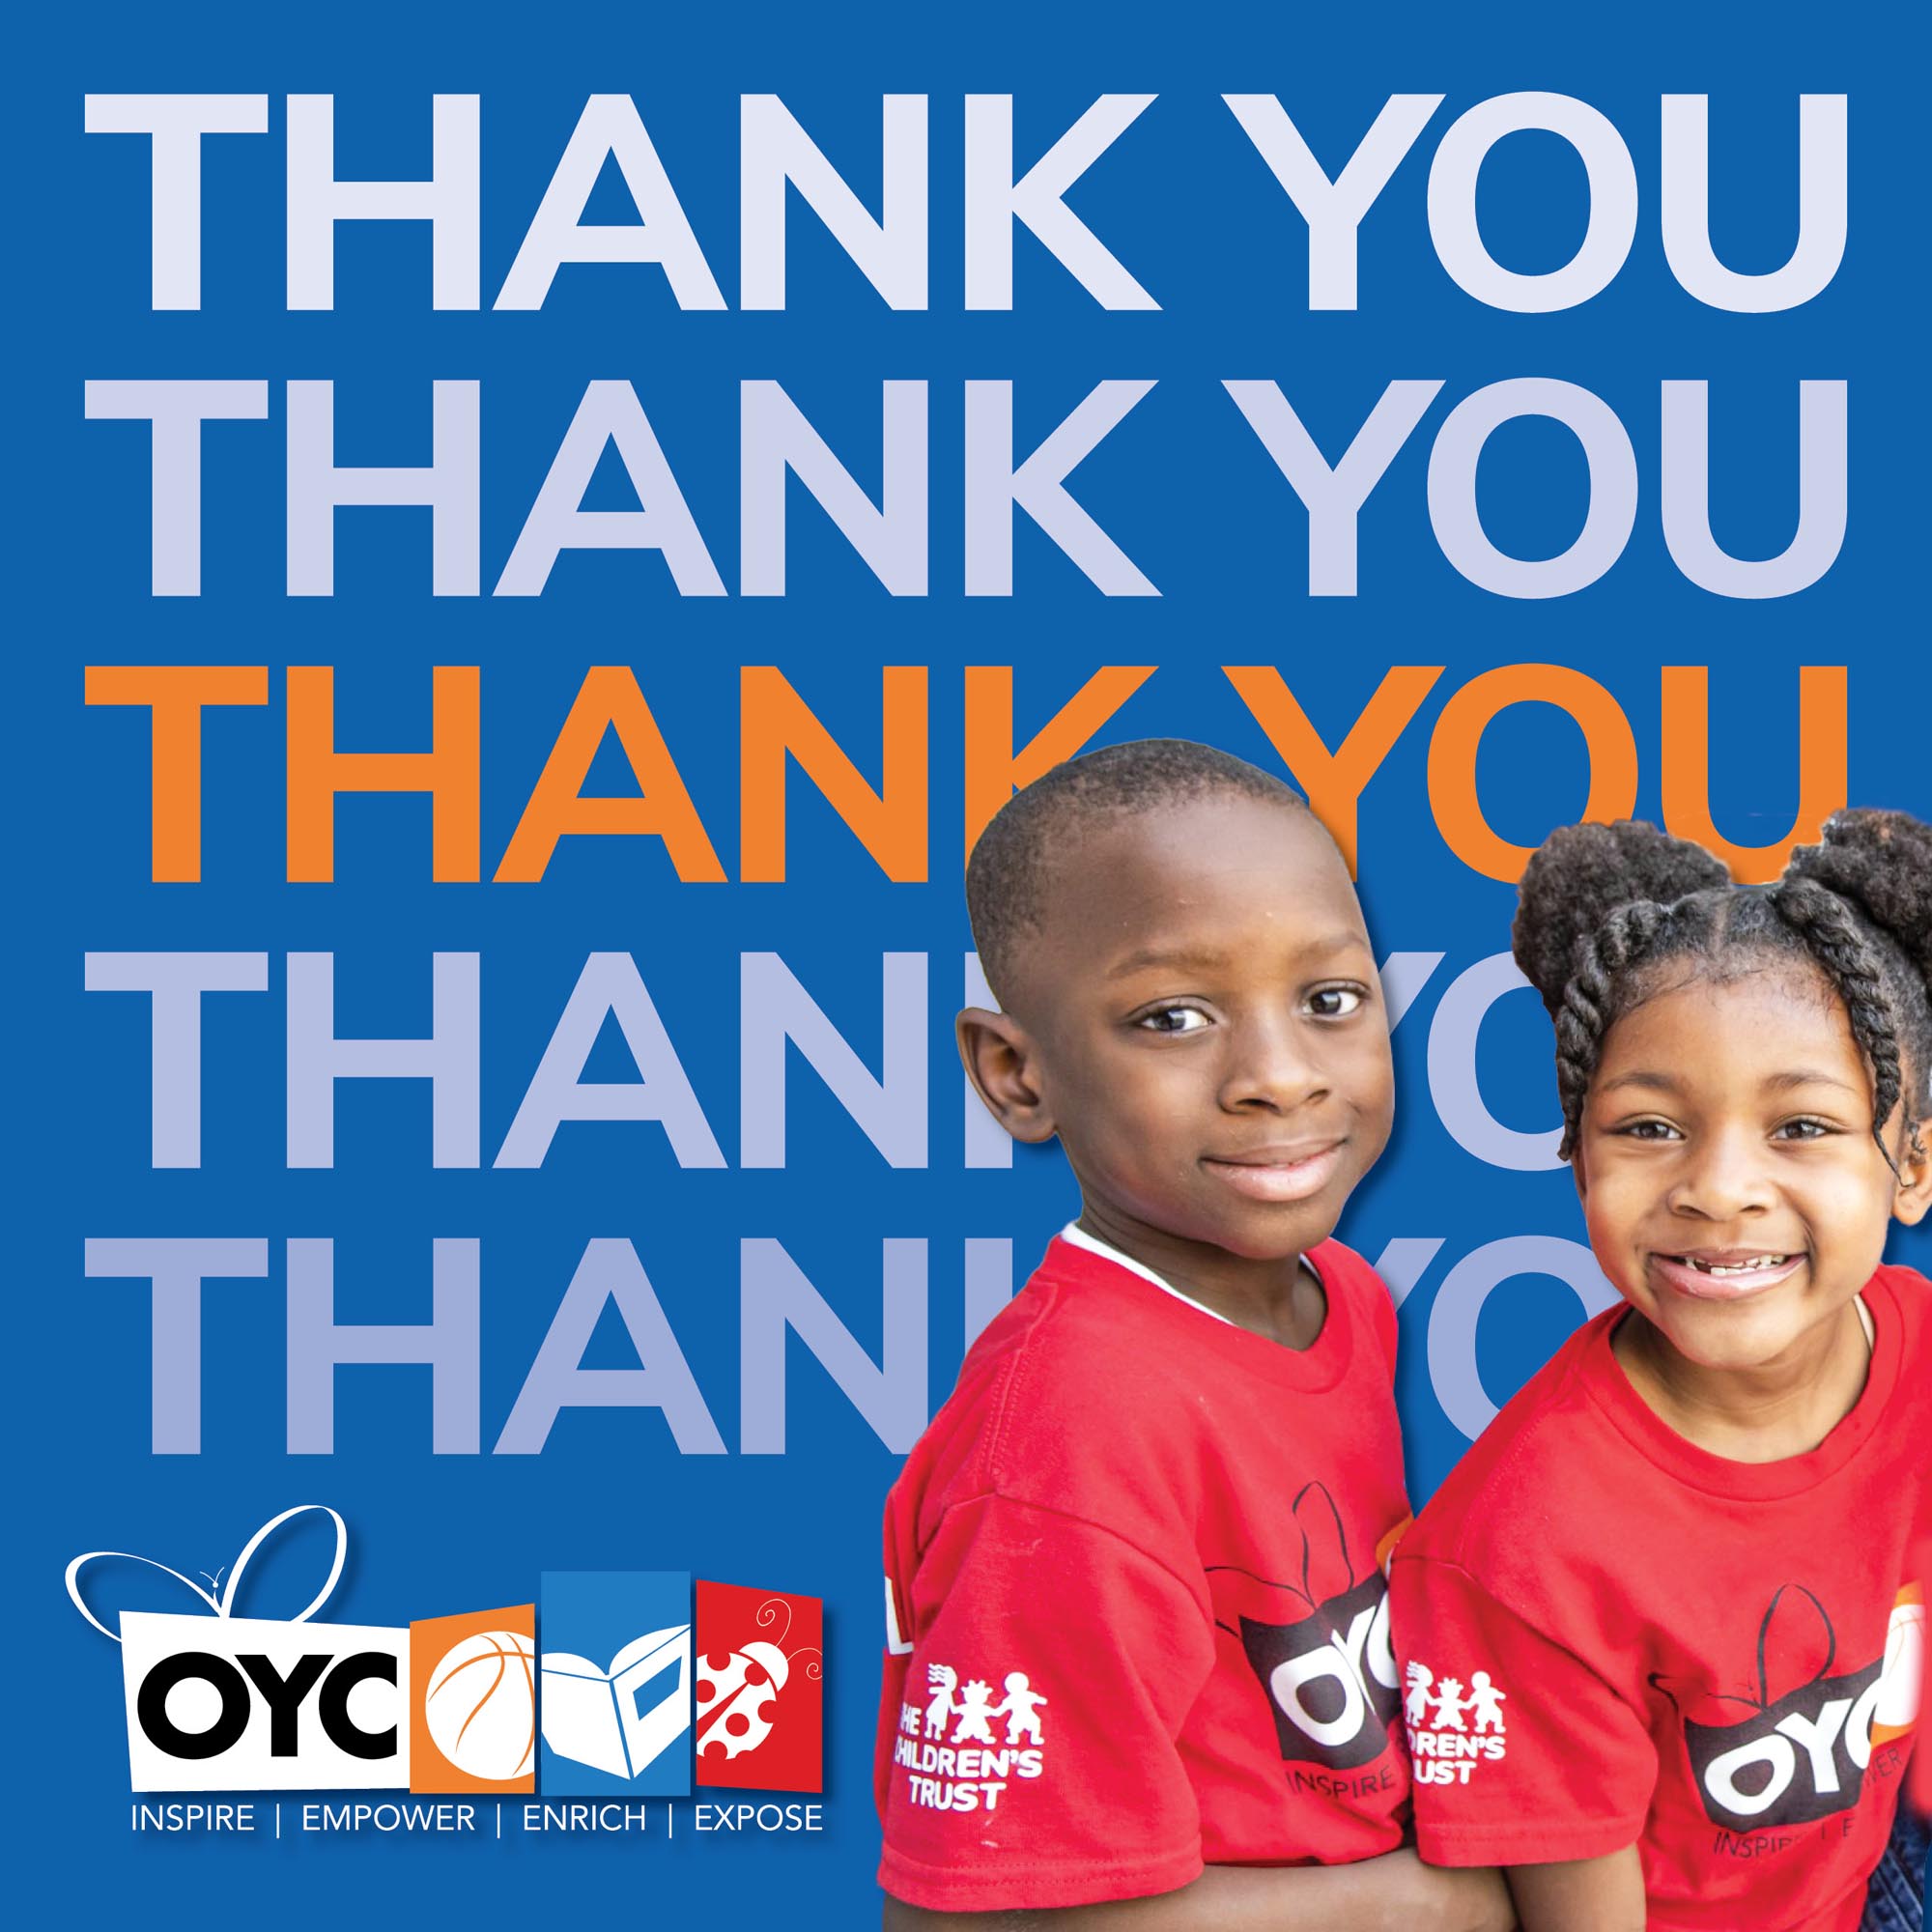 Thank you from OYC Miami